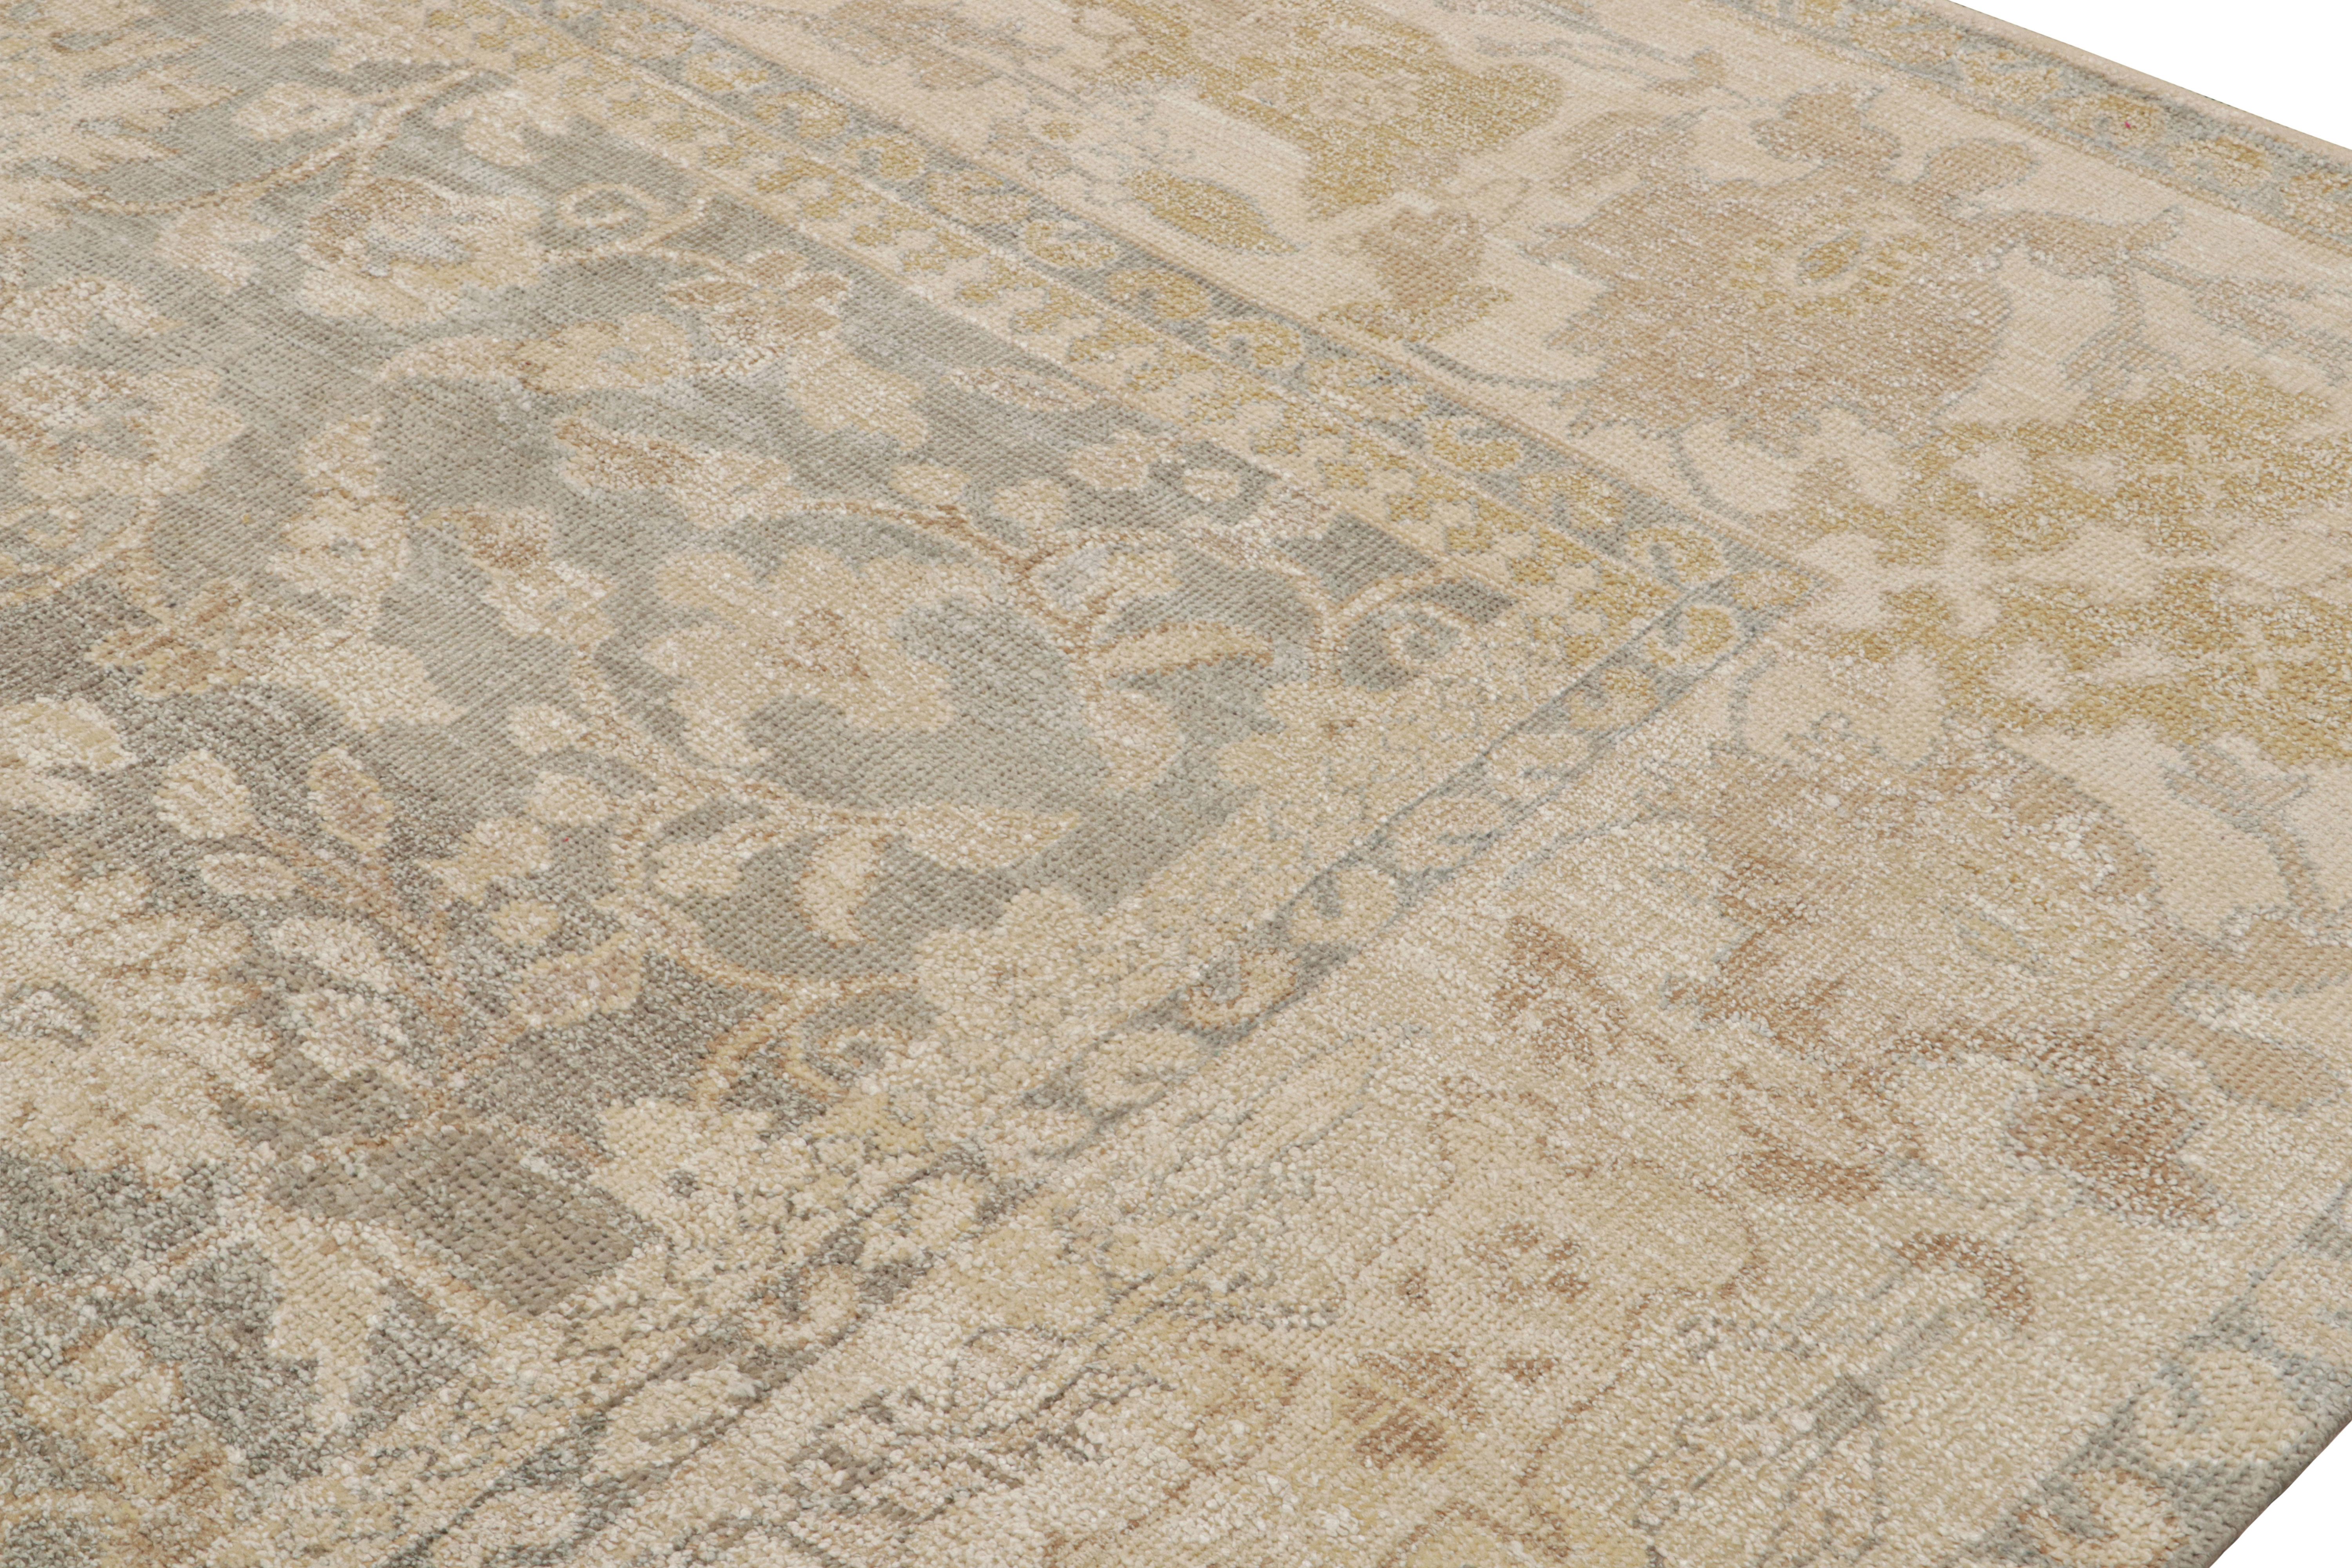 Rug & Kilim’s Oushak Style Rug in Beige-Brown, Gray Floral Patterns In New Condition For Sale In Long Island City, NY